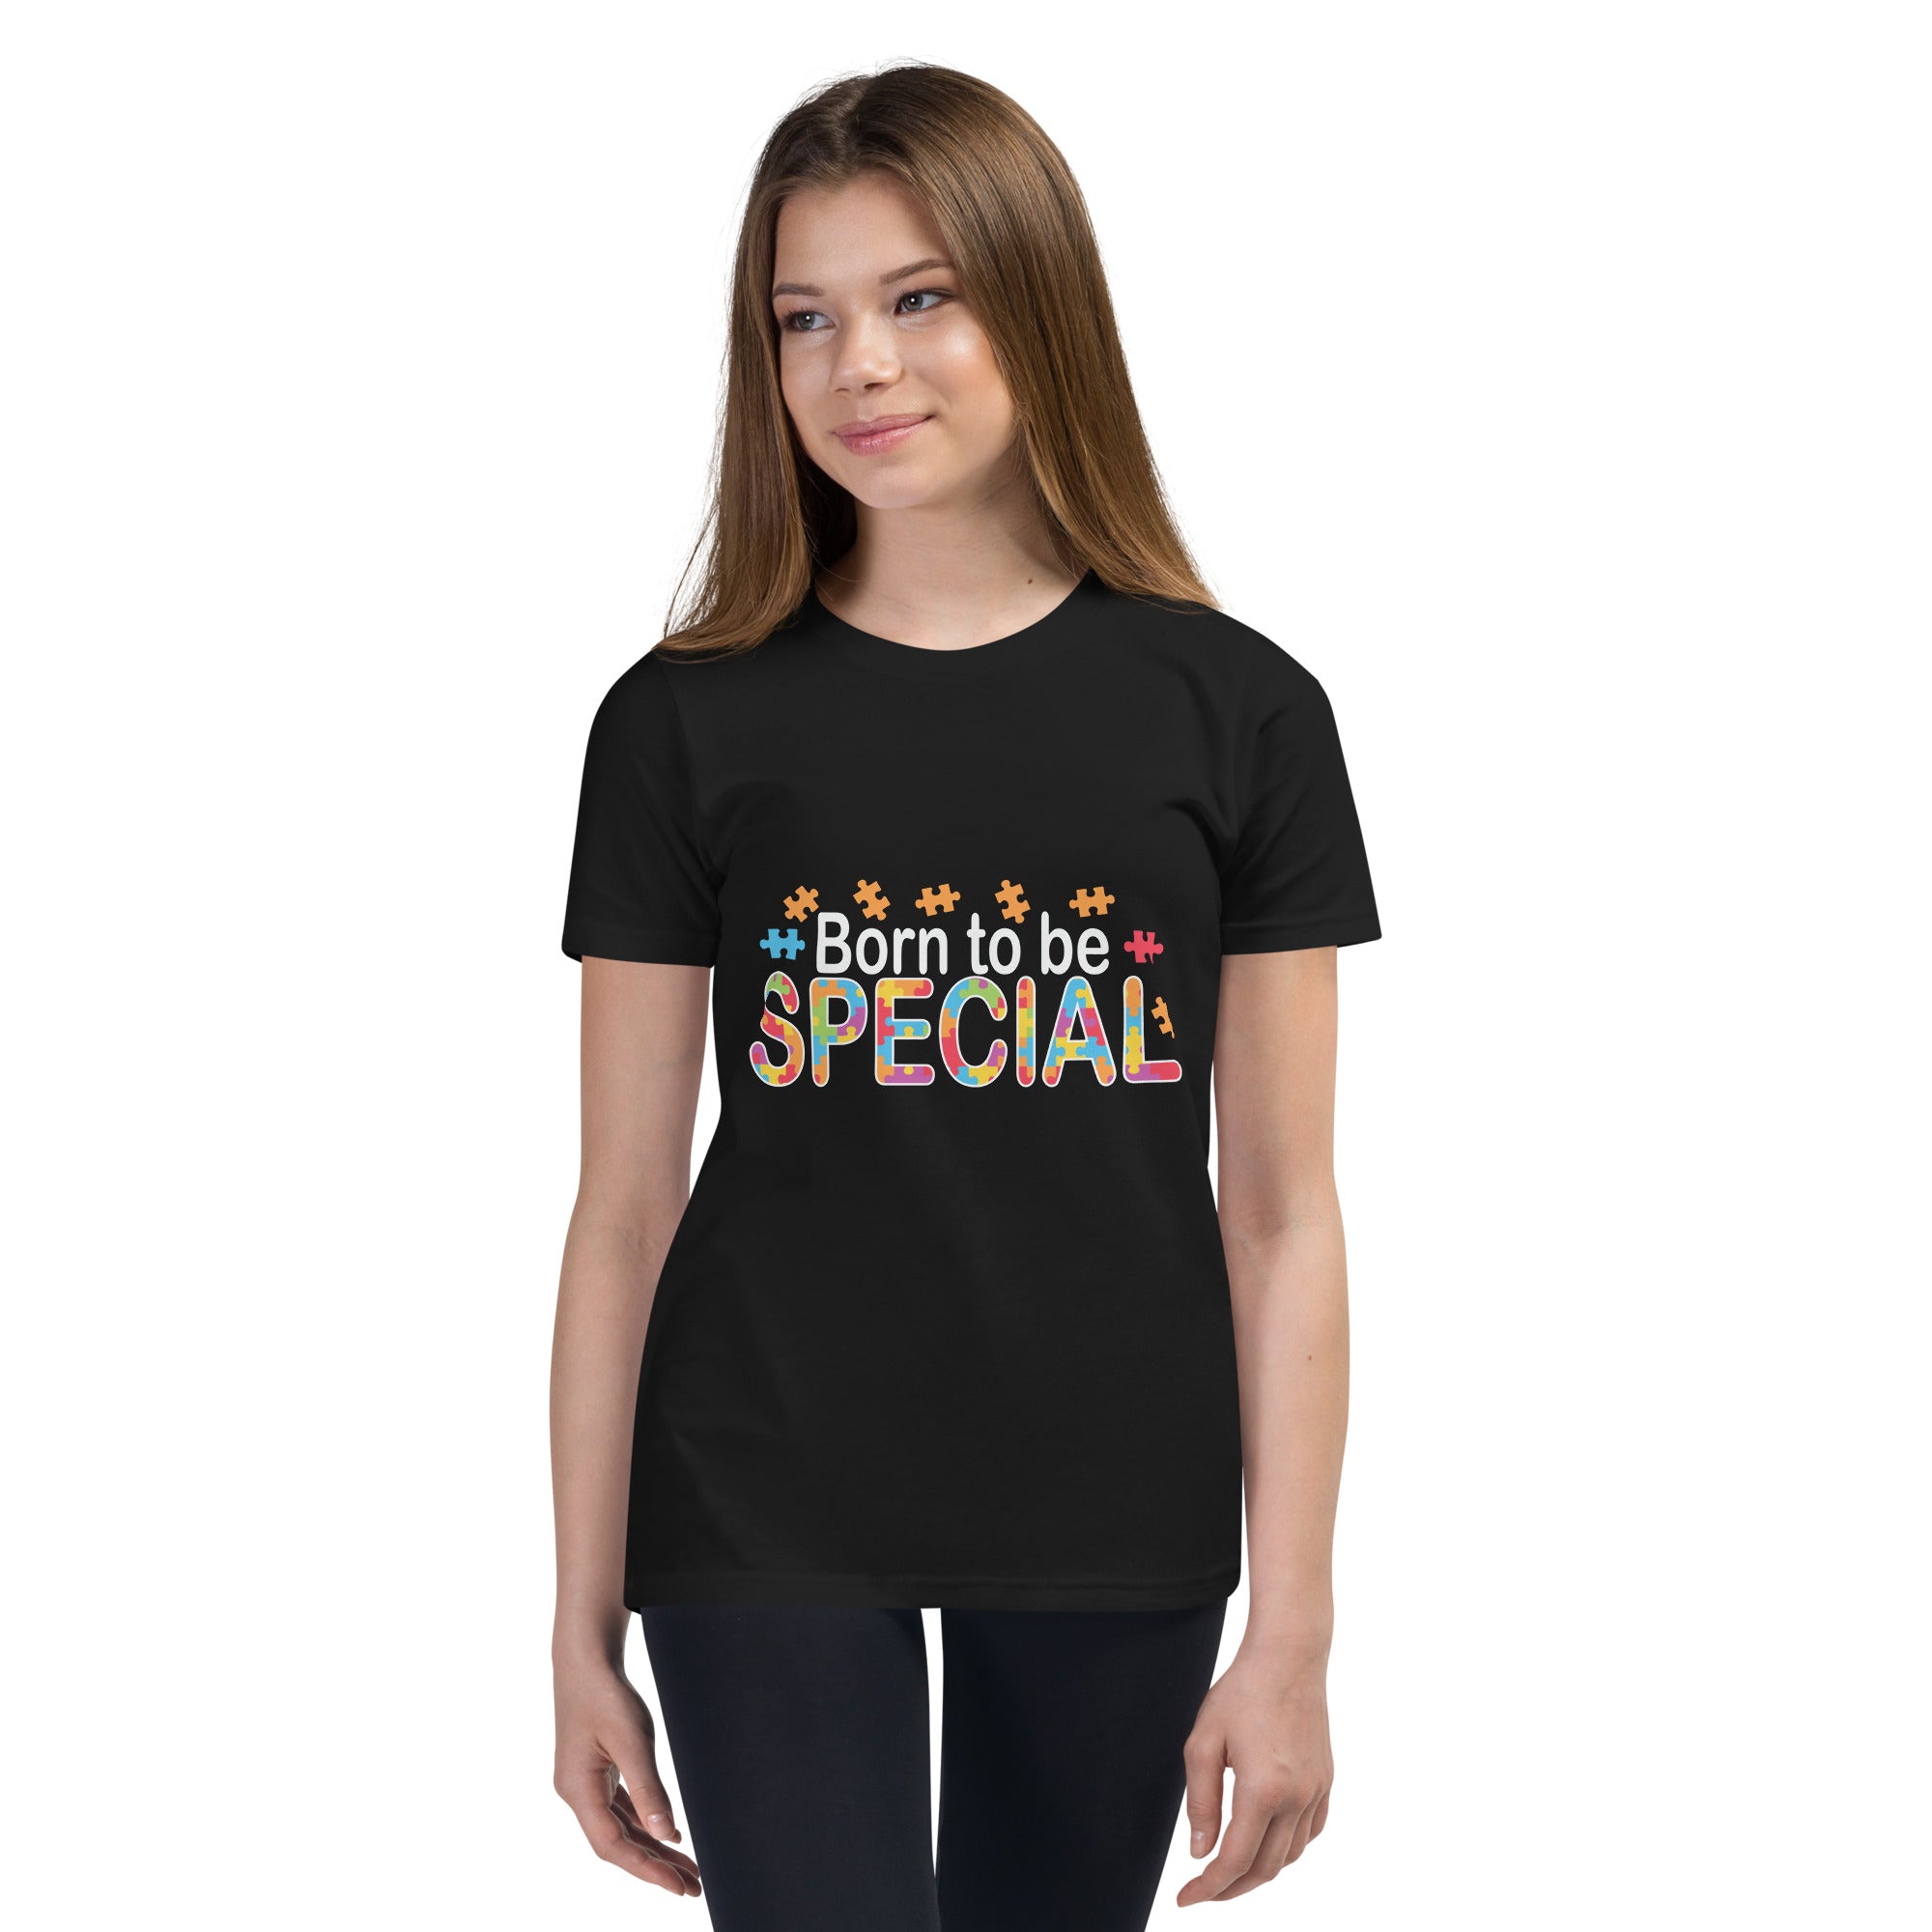 Born to be special - Unisex Tee